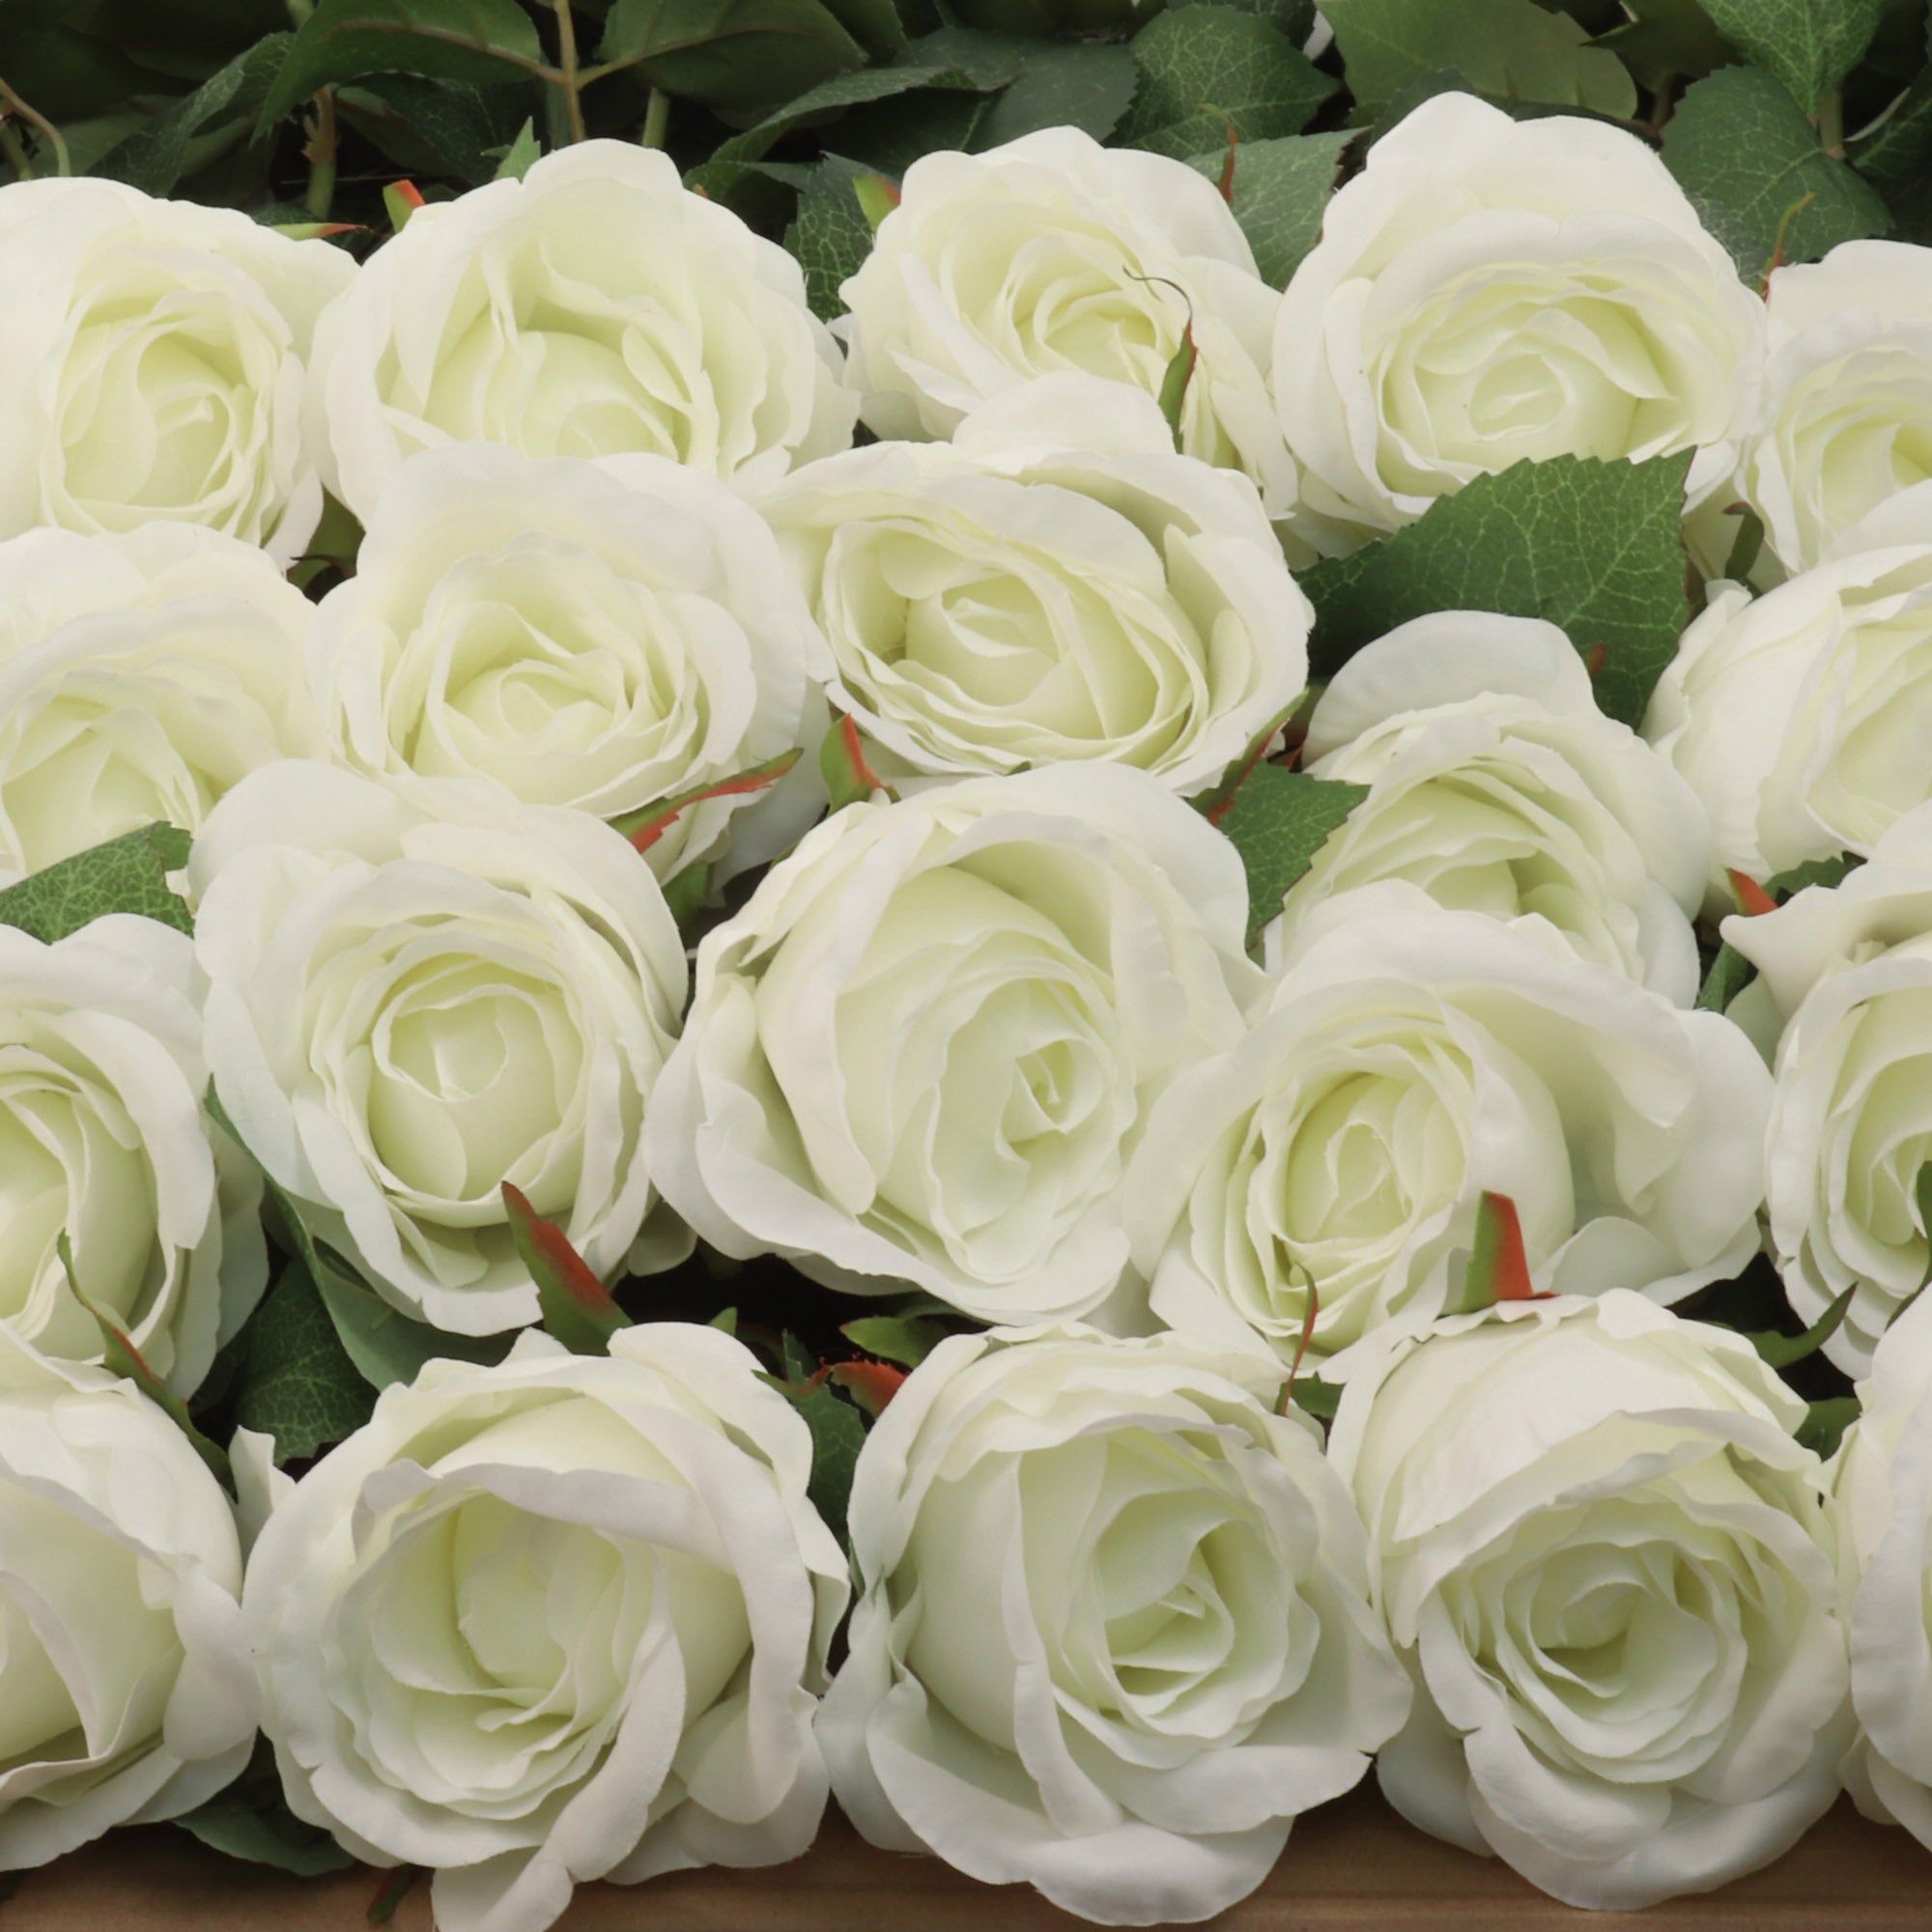 Artificial  White Rose Bud-20" Artificial Flowers ArtificialFlowers   